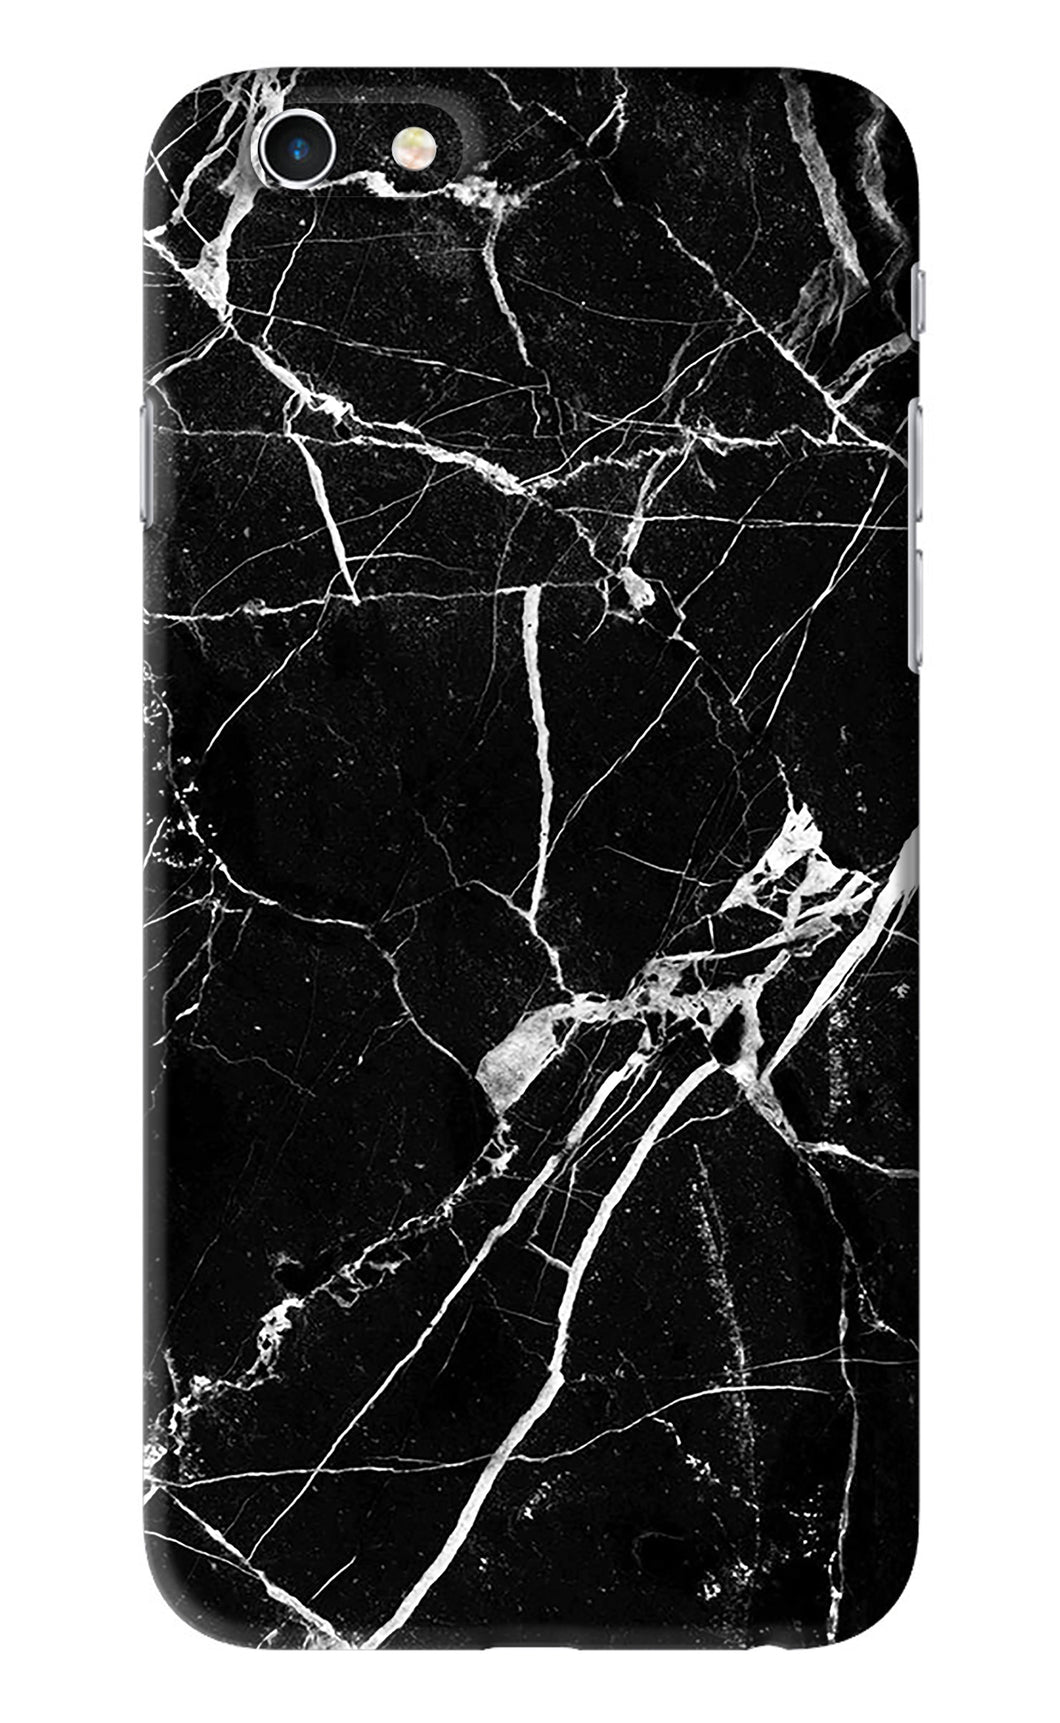 Black Marble Texture 2 iPhone 6 Back Skin Wrap